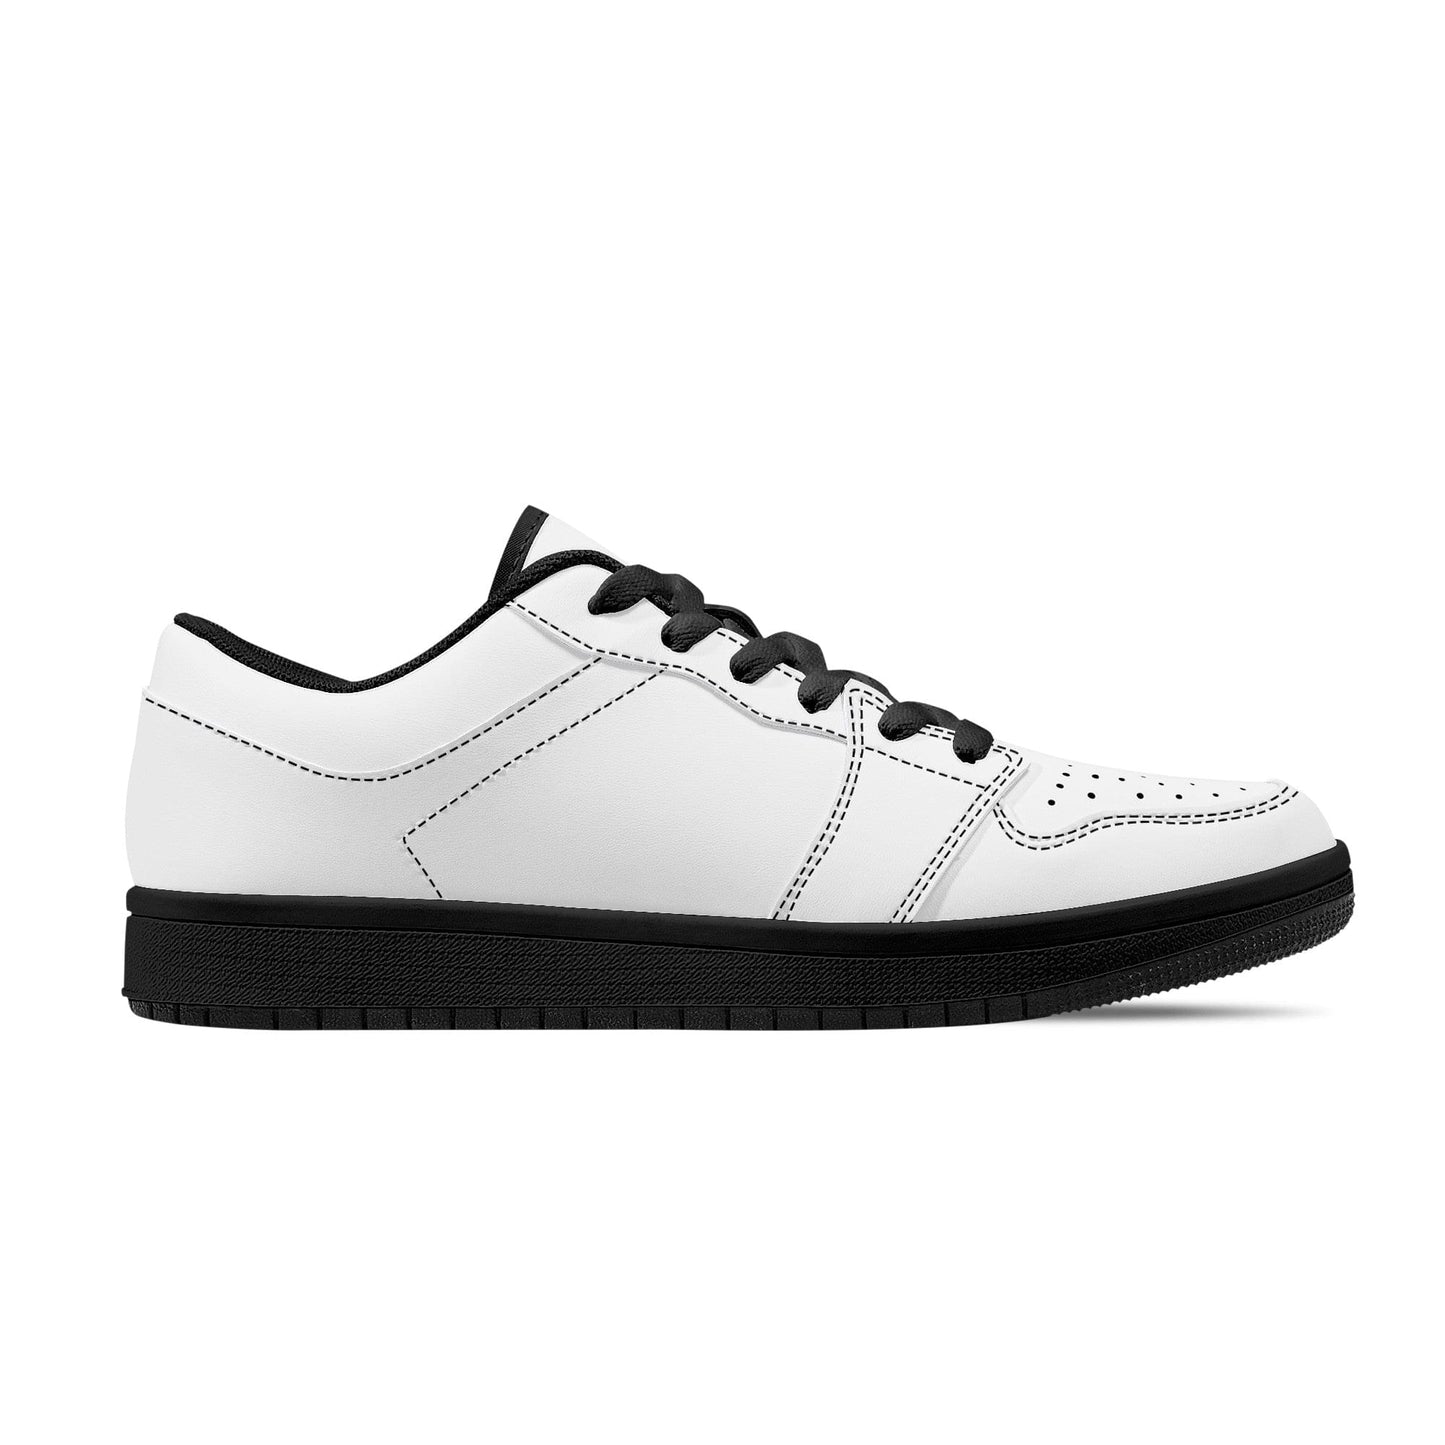 Custom Low Top Sneakers - Black Sole D15 Colloid Colors 